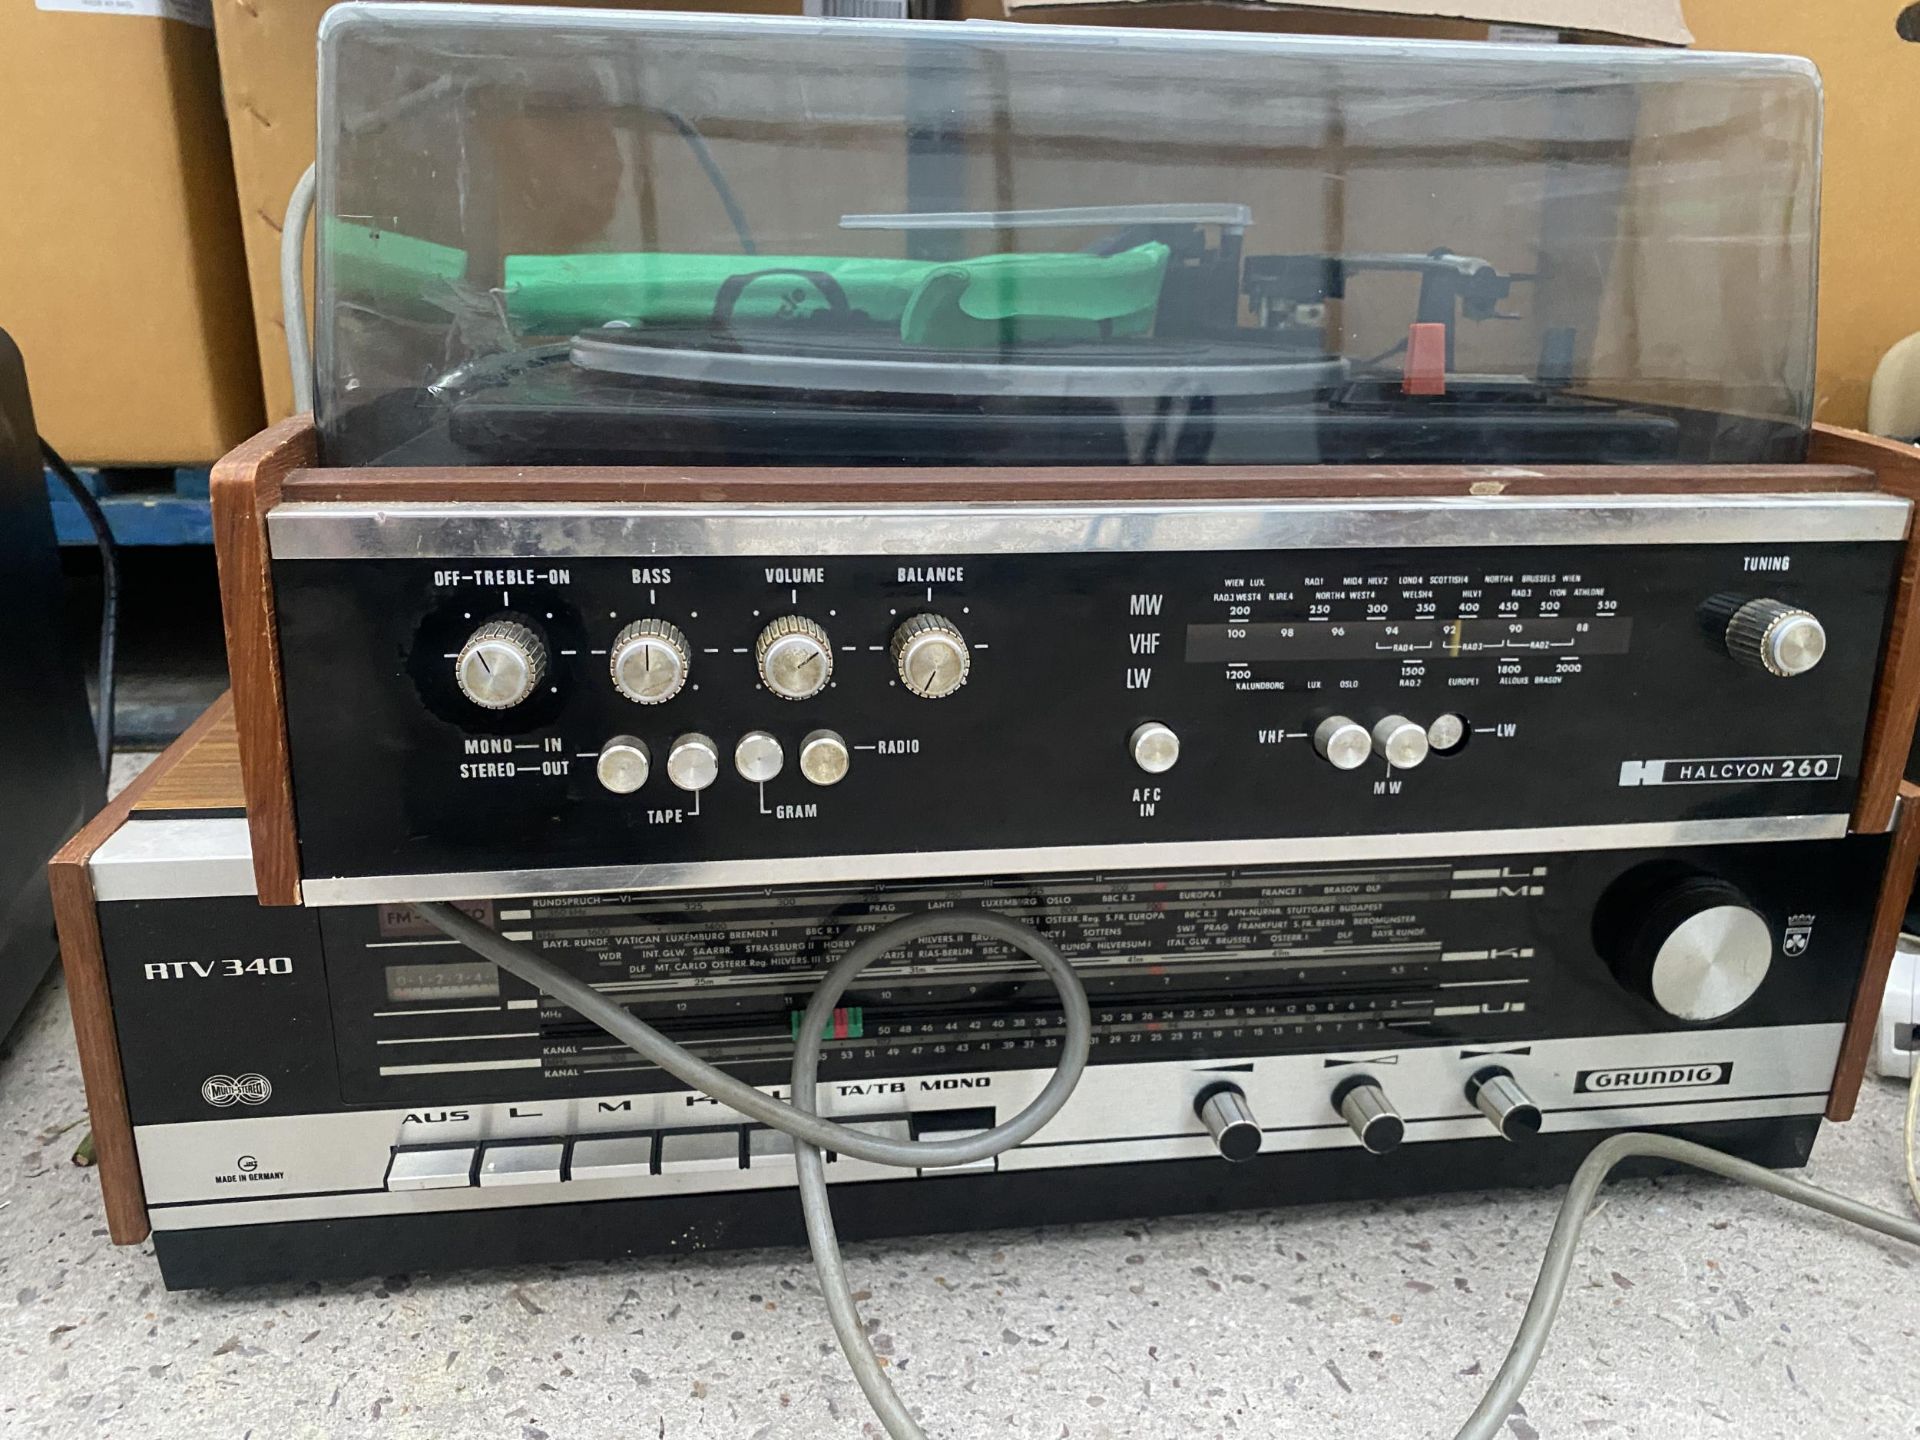 A GRUNDIG STEREO SYSTEM AND A HALCYON 260 RECORD PLAYER - Image 3 of 3